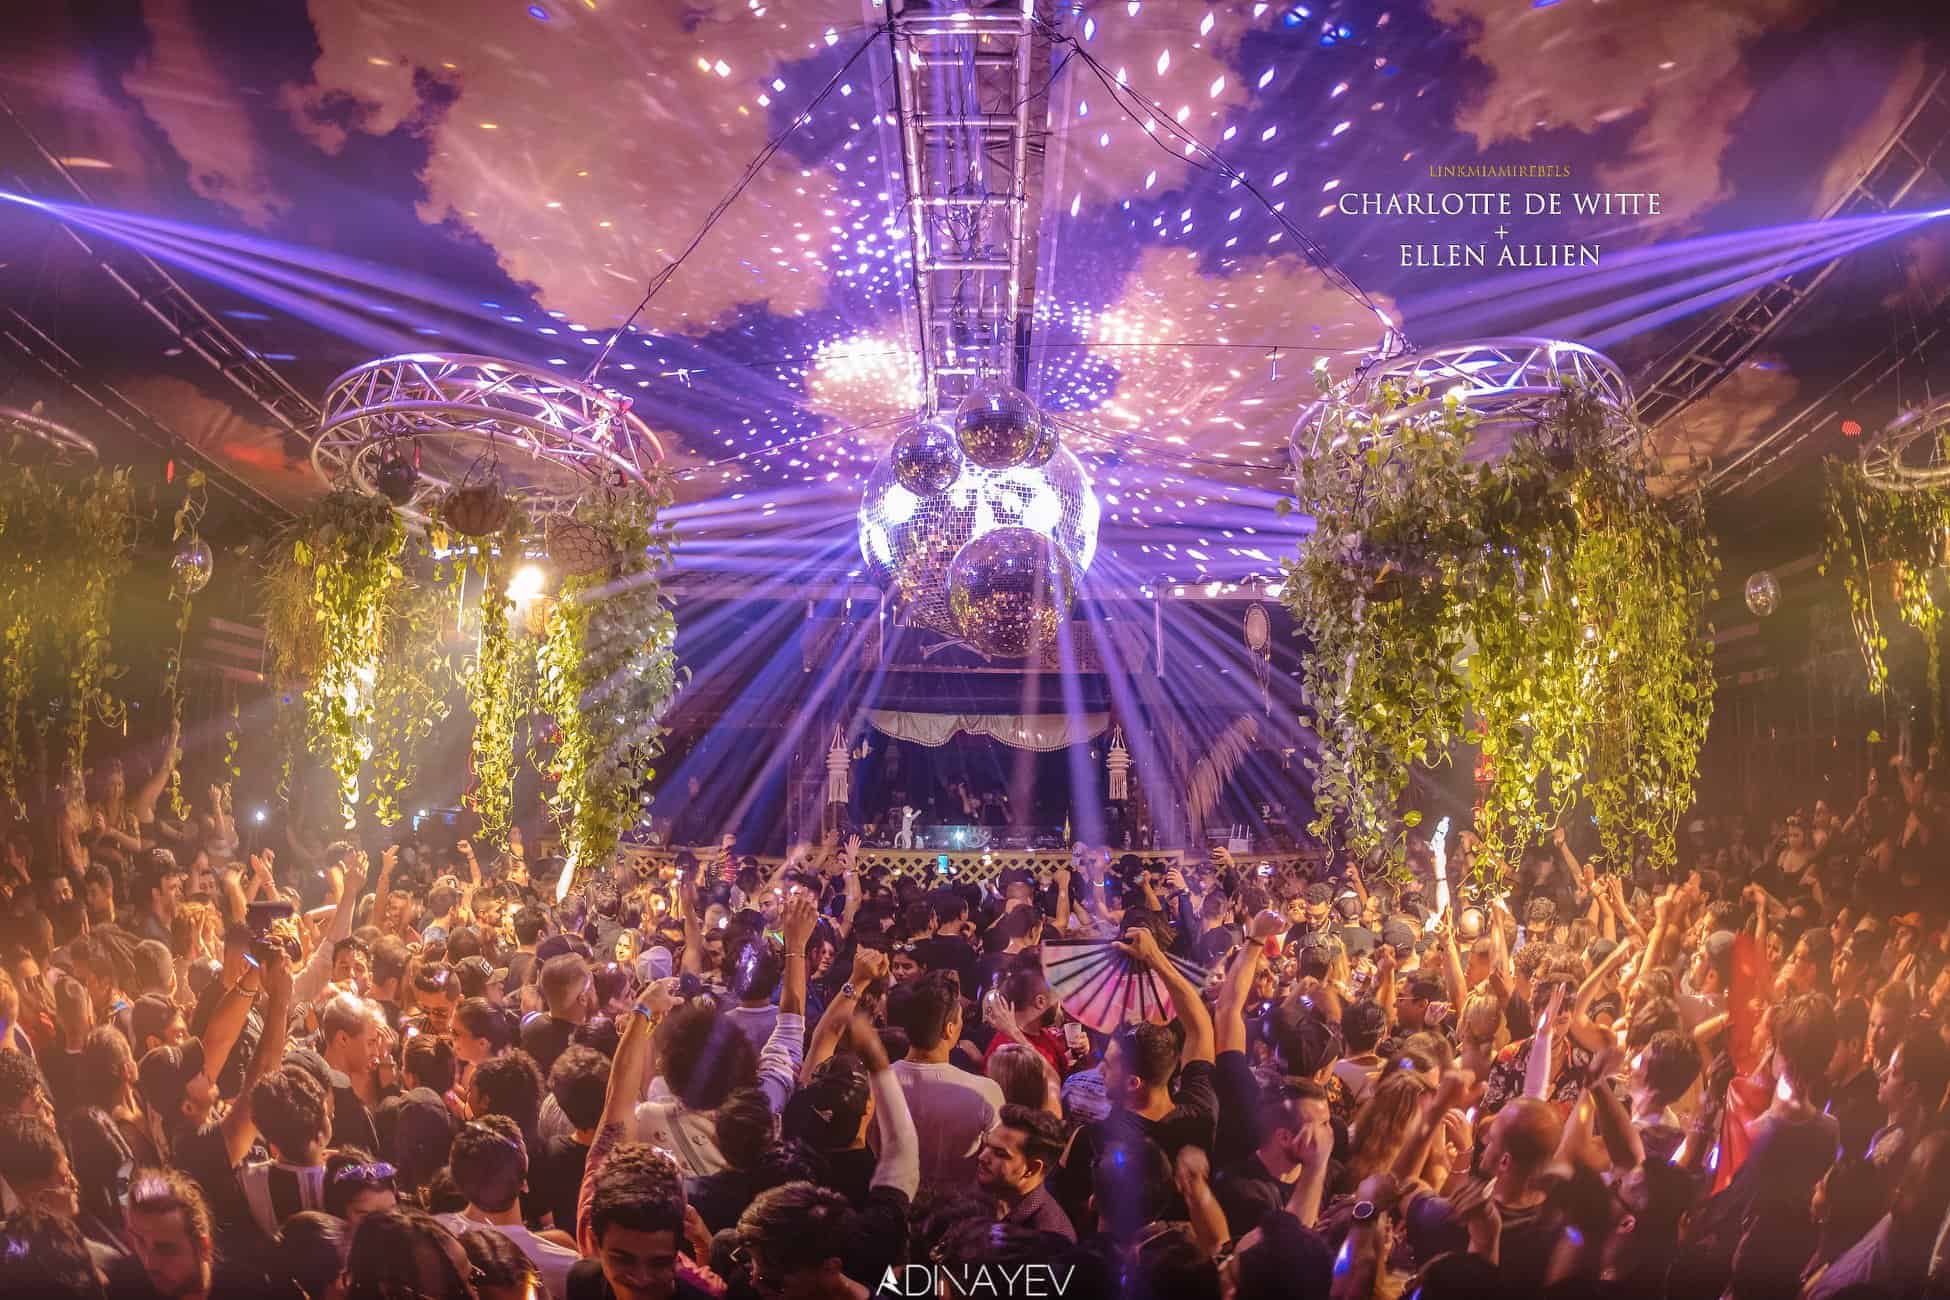 Miami Music Week to close with Space Miami event, with no official end time